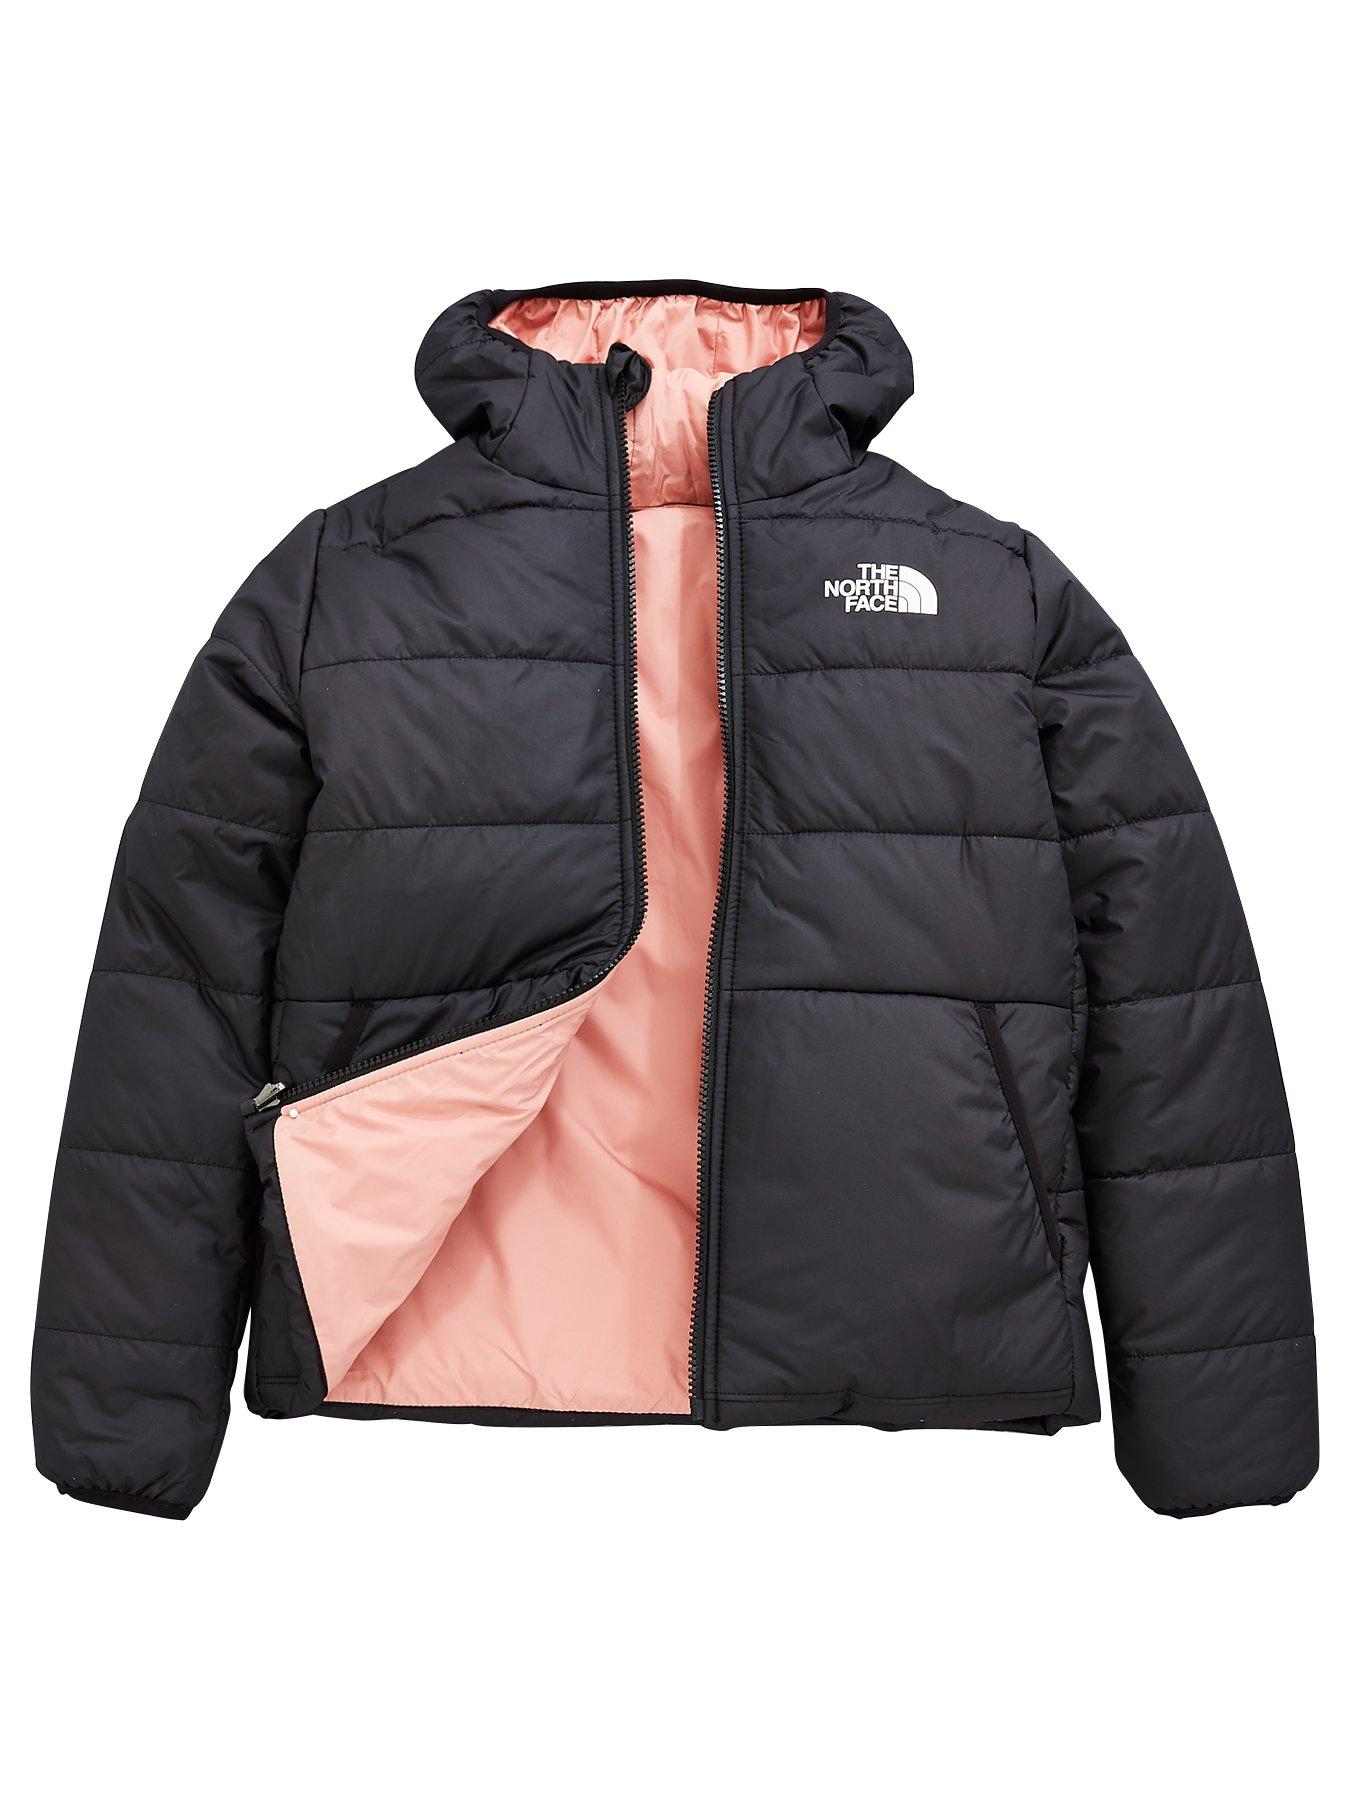 north face childs coat